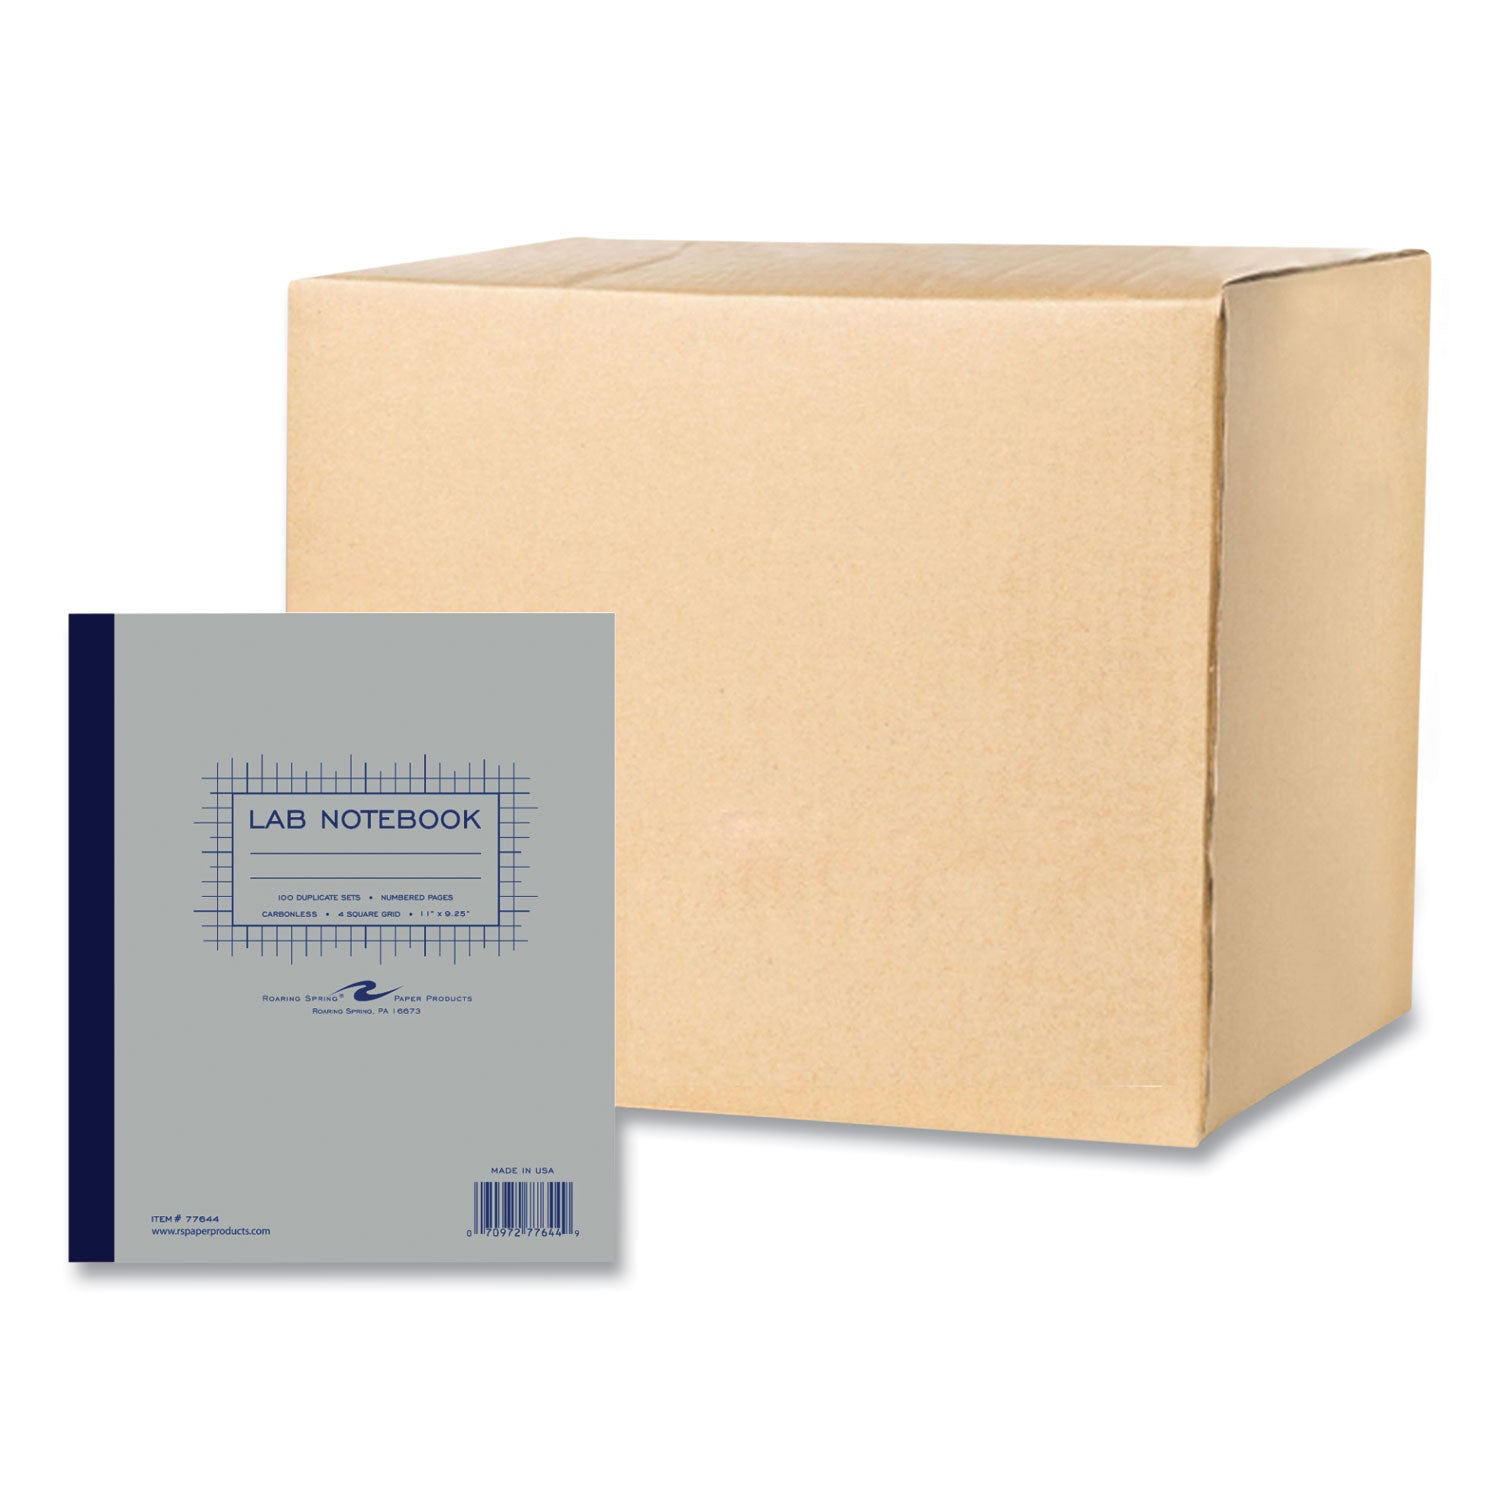 lab-and-science-carbonless-notebook-quad-rule-4-sq-in-gray-cover-200-11-x-925-sheets-5-ctships-in-4-6-business-days_roa77644cs - 1